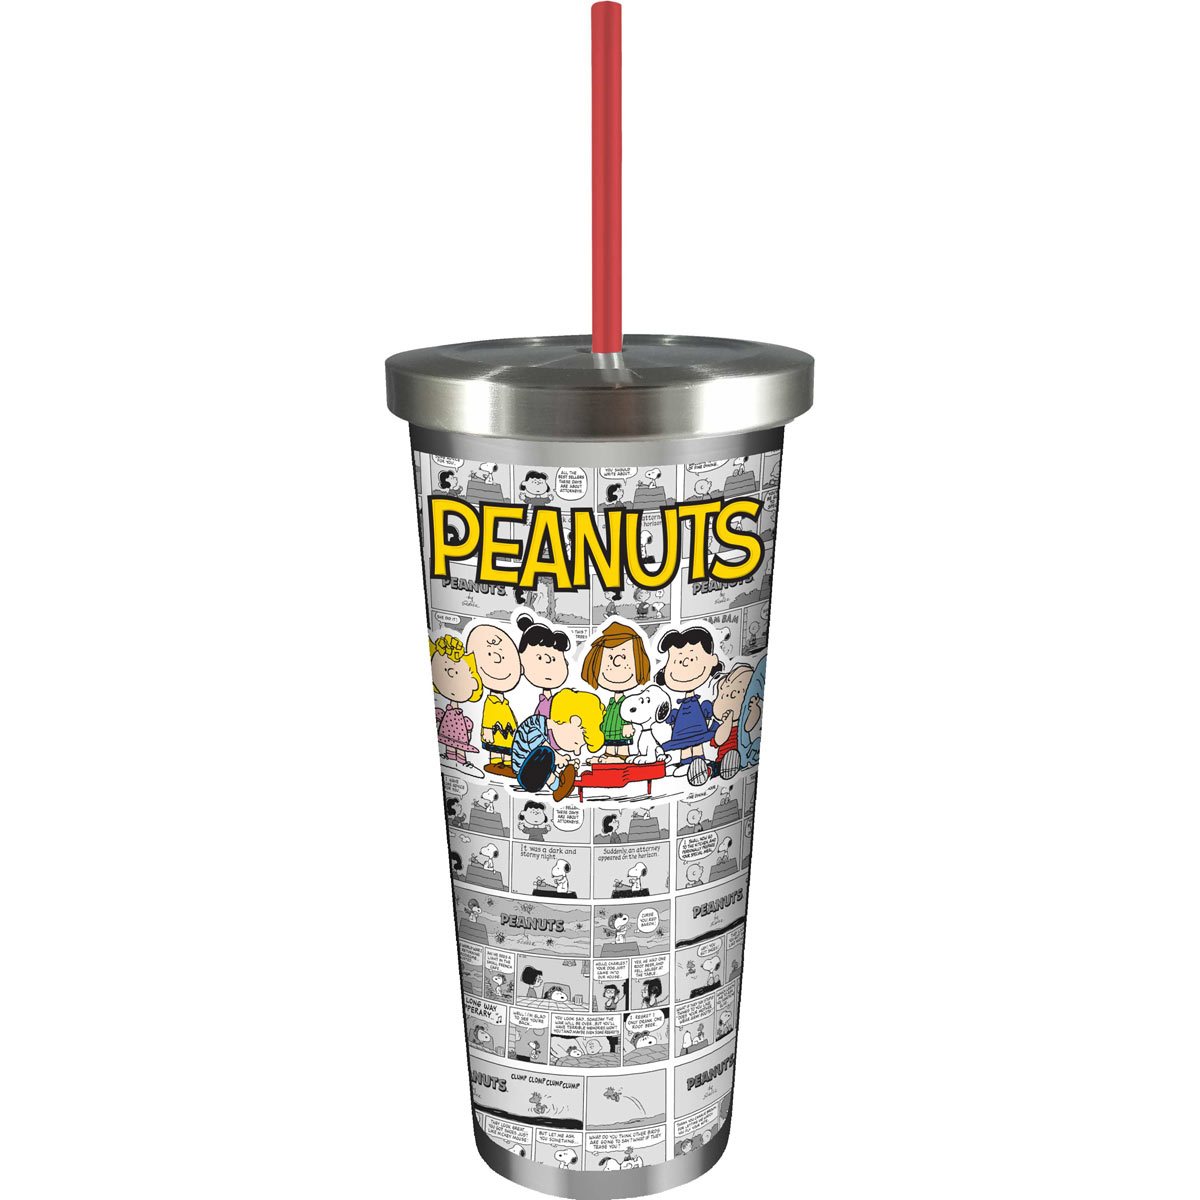 Peanuts 24 oz. Stainless Steel Travel Cup with Straw